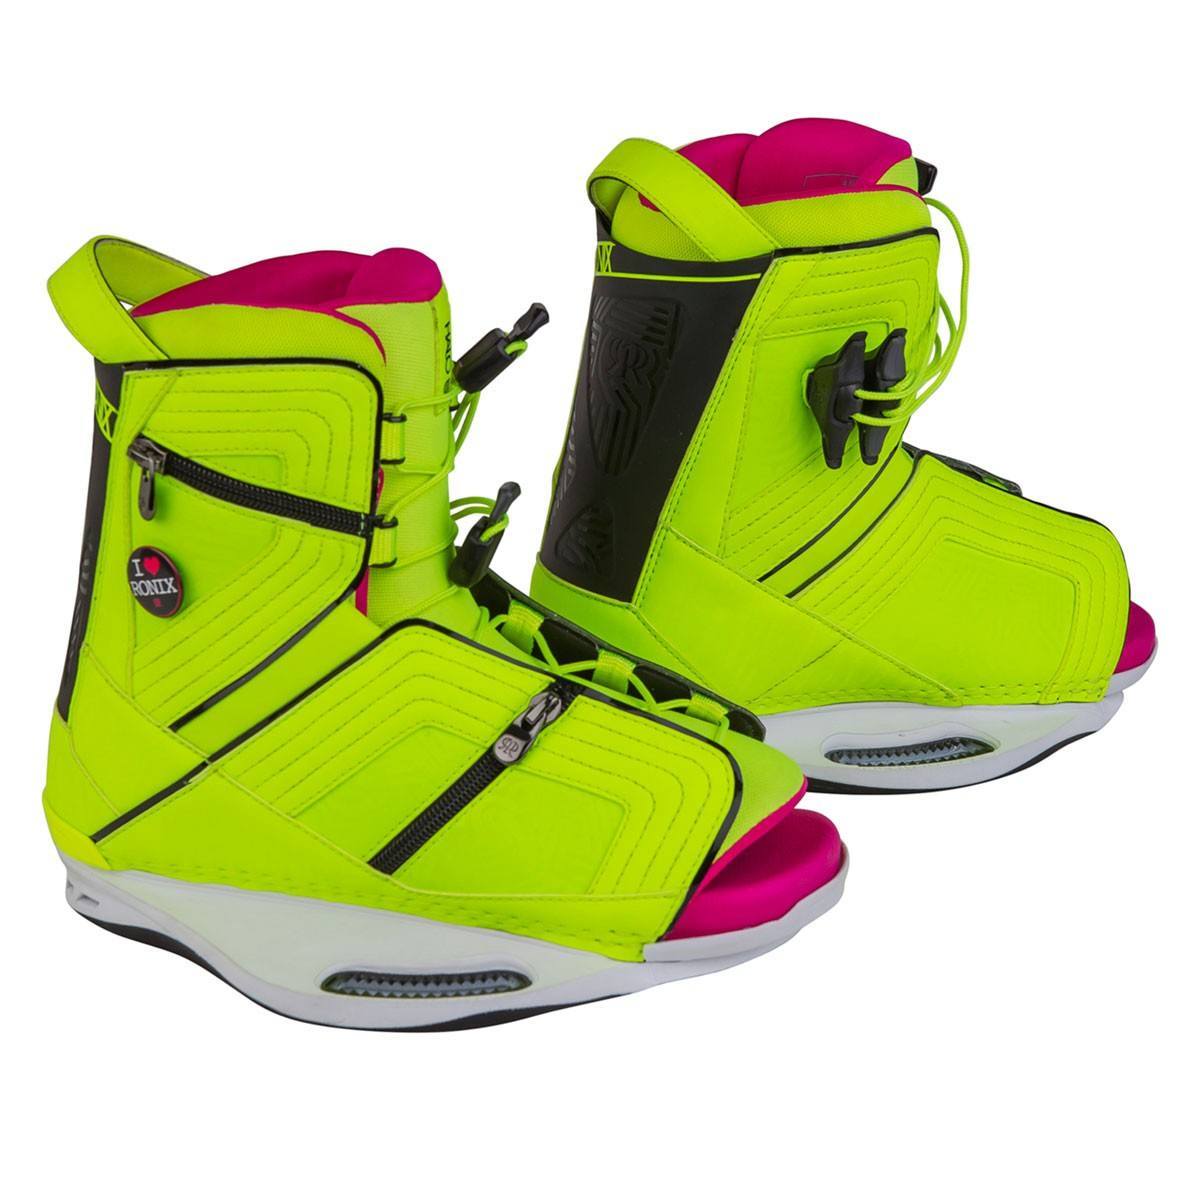 2015-ronix-boots-halo-02